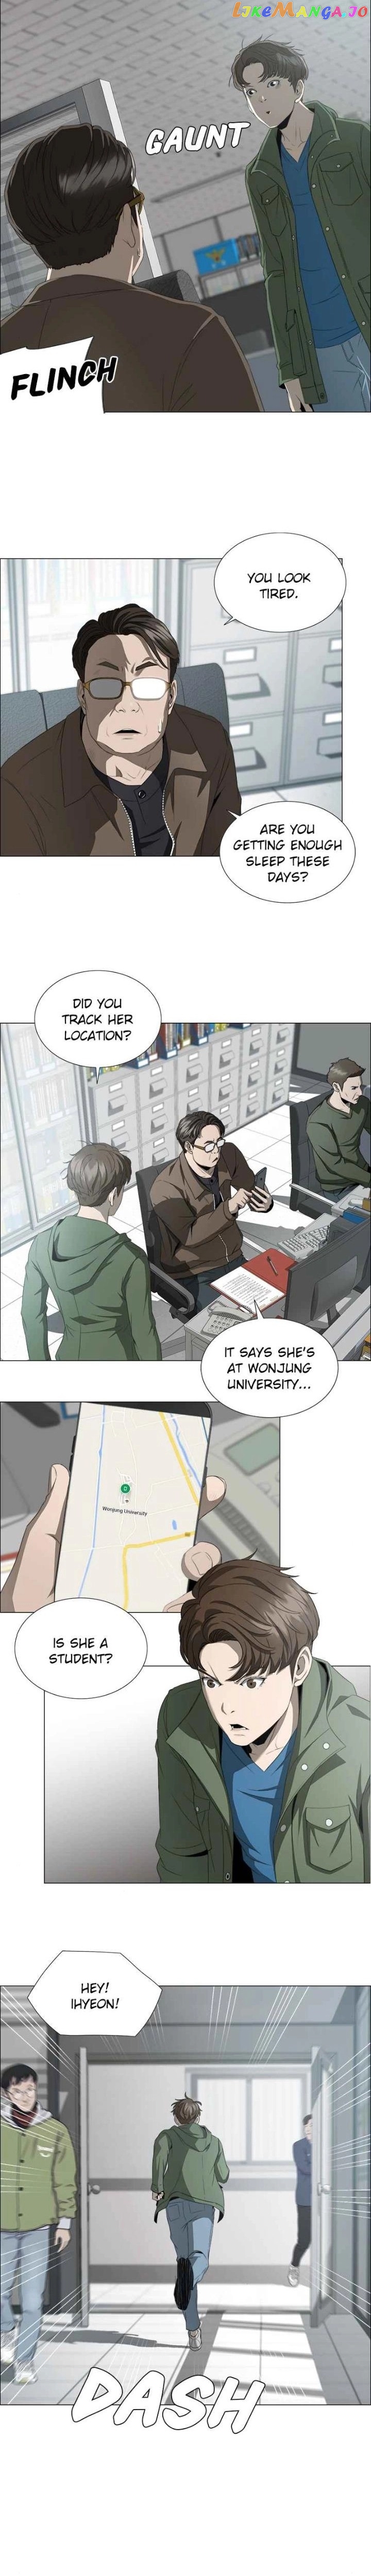 Happiness Happiness_(Official)___Chapter_6 - page 6